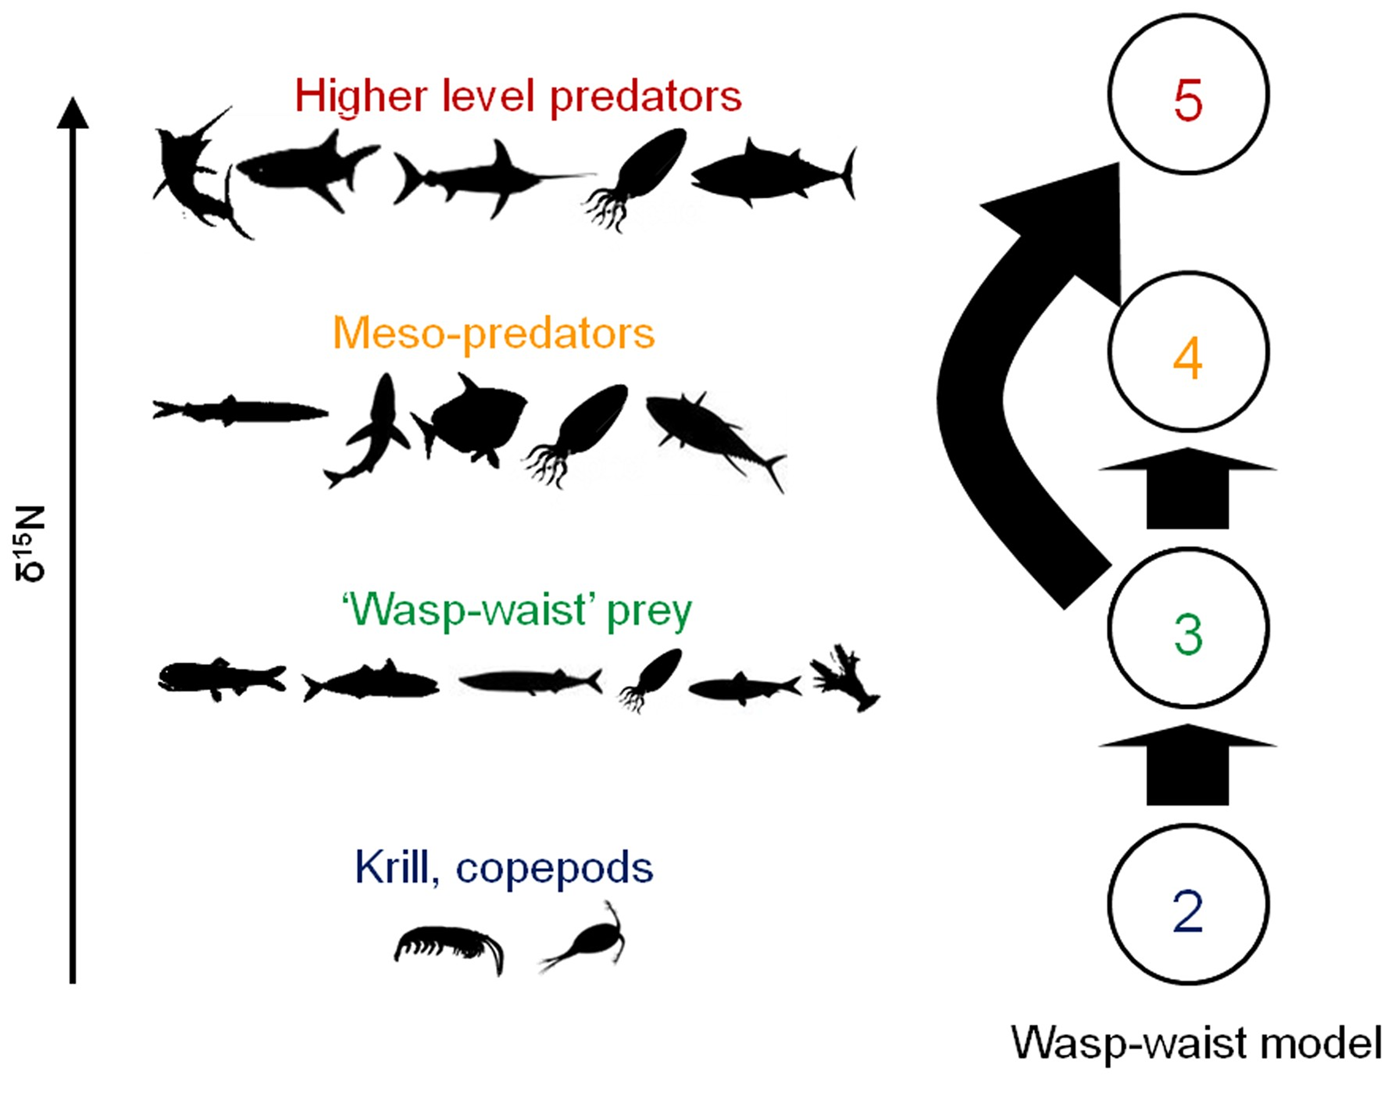 Four heterotrophic trophic levels are shown labeled Wasp-Waist Model. Level two has krill and copepods, wasp-waist prey has six different species, meso-predators have five different species, and the fifth level has five different species labeled higher level predators. Wasp-waist prey feeds the higher level predators and meso-predators, but meso-predators do not feed predators. An arrow showing the concentration of nitrogen 15 shows an increase in concentration with higher trophic levels.